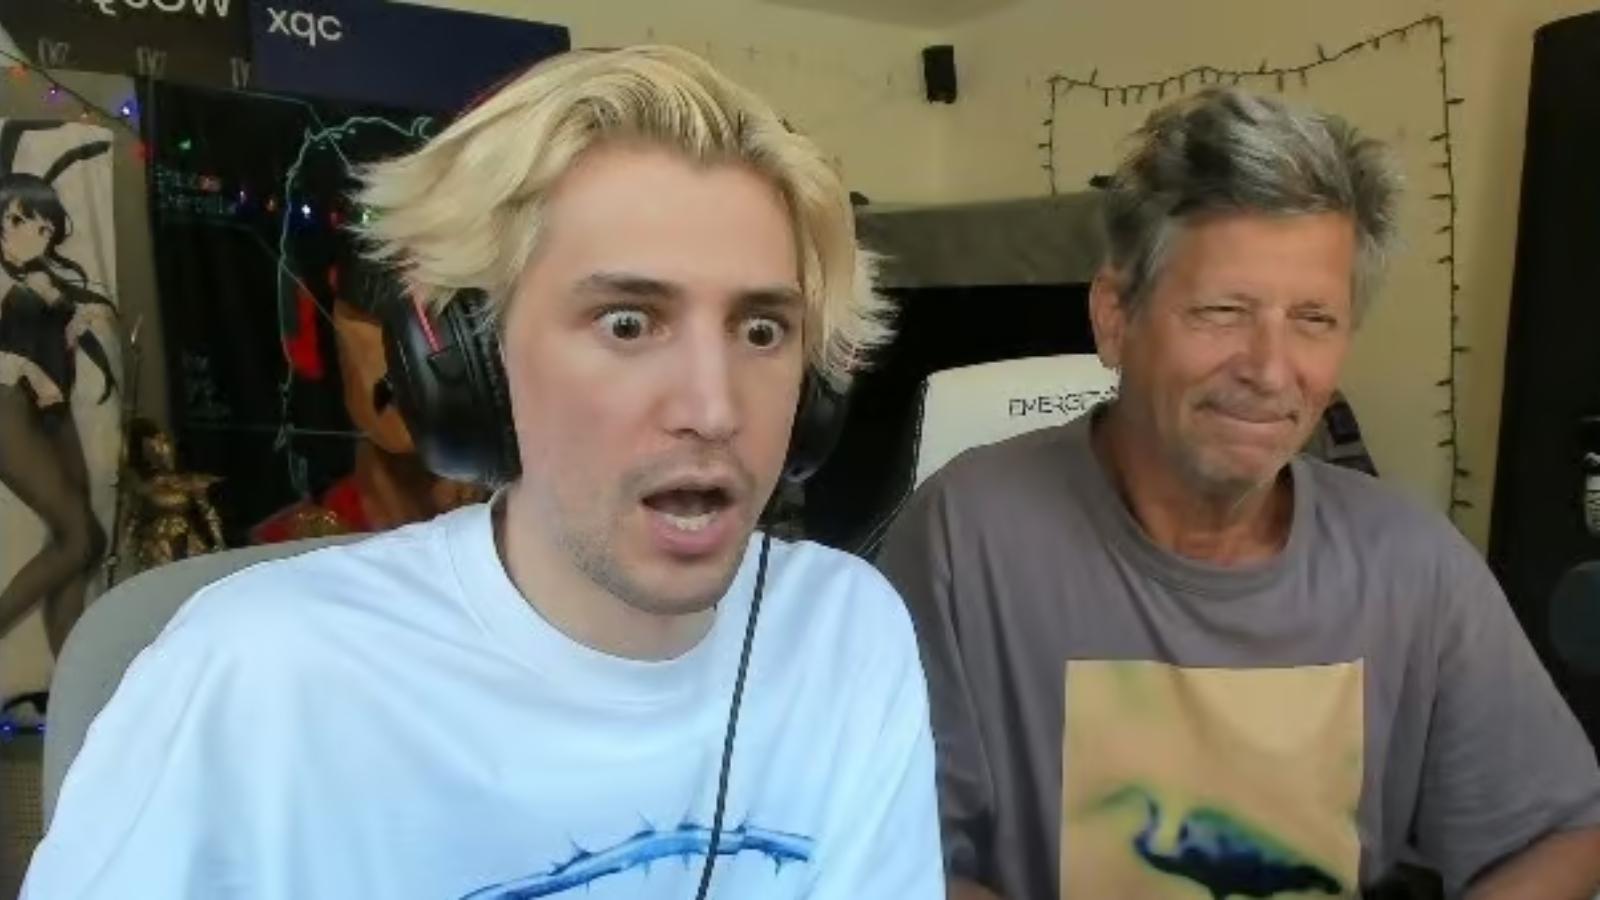 xqc and his dad on twitch